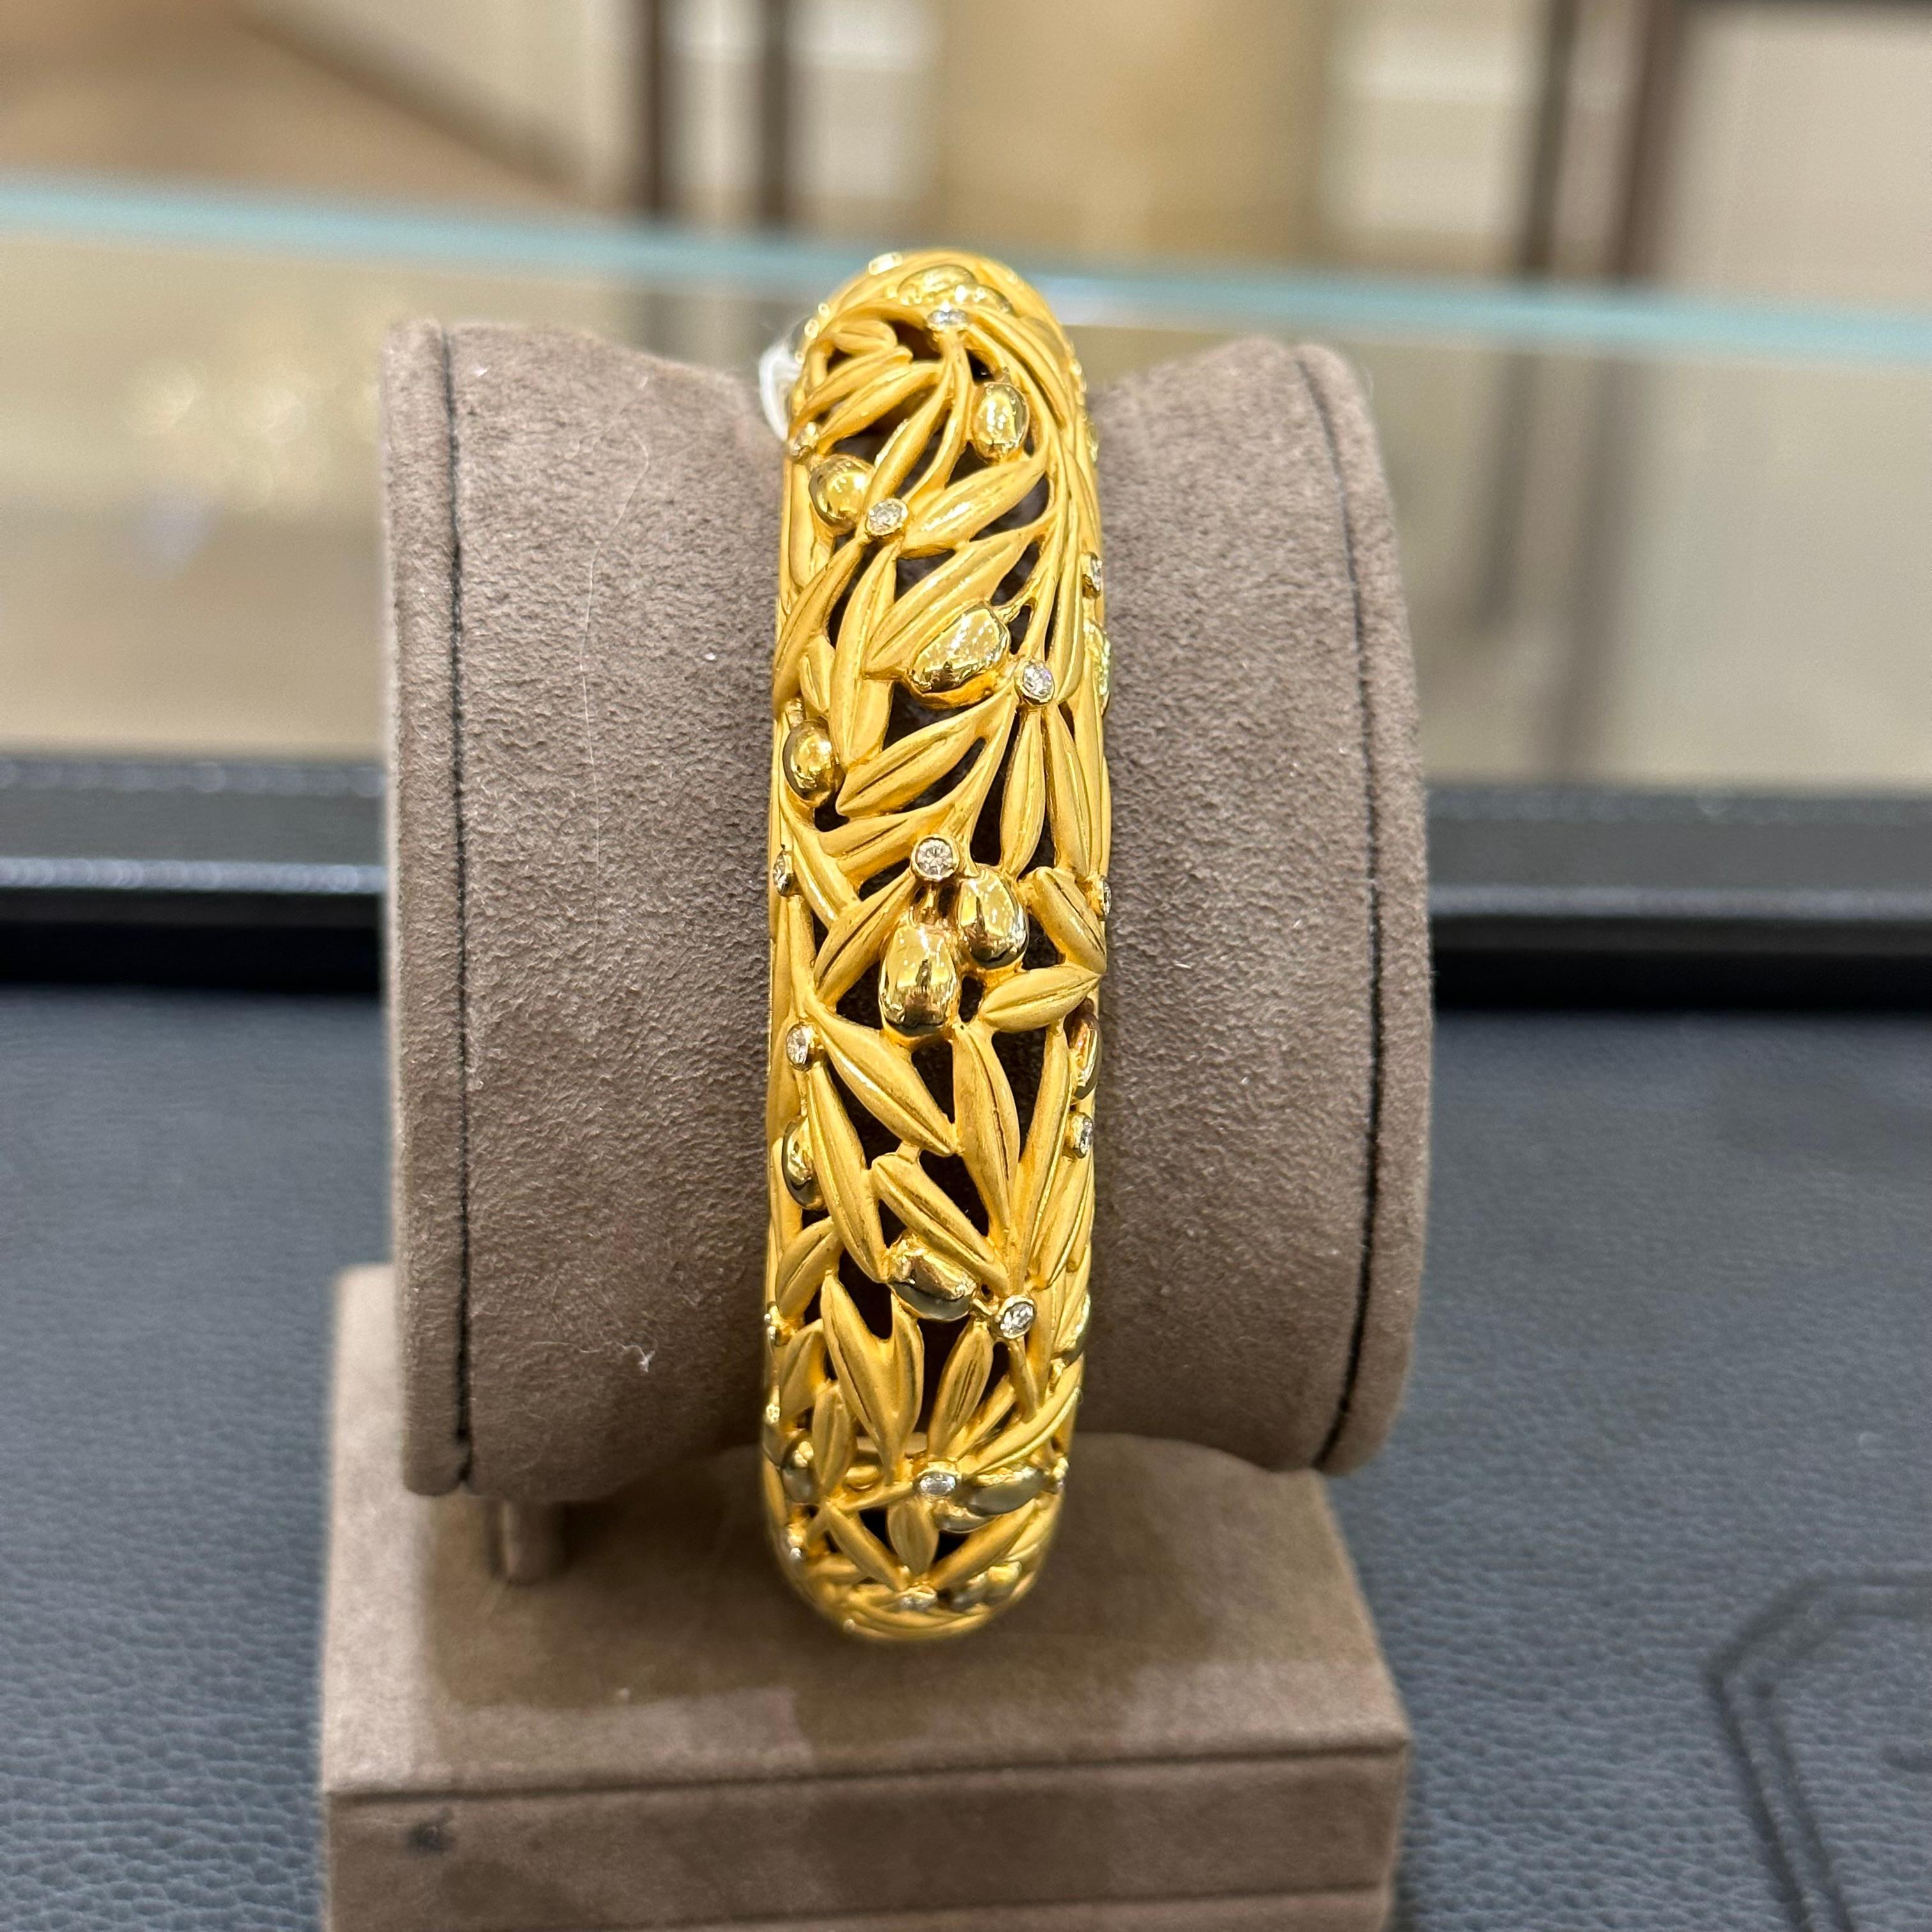 SIGNED 18K Yellow Gold and Diamond Accent Hinged Cuff Bangle with openwork Motif by Carrera Y Carrera.